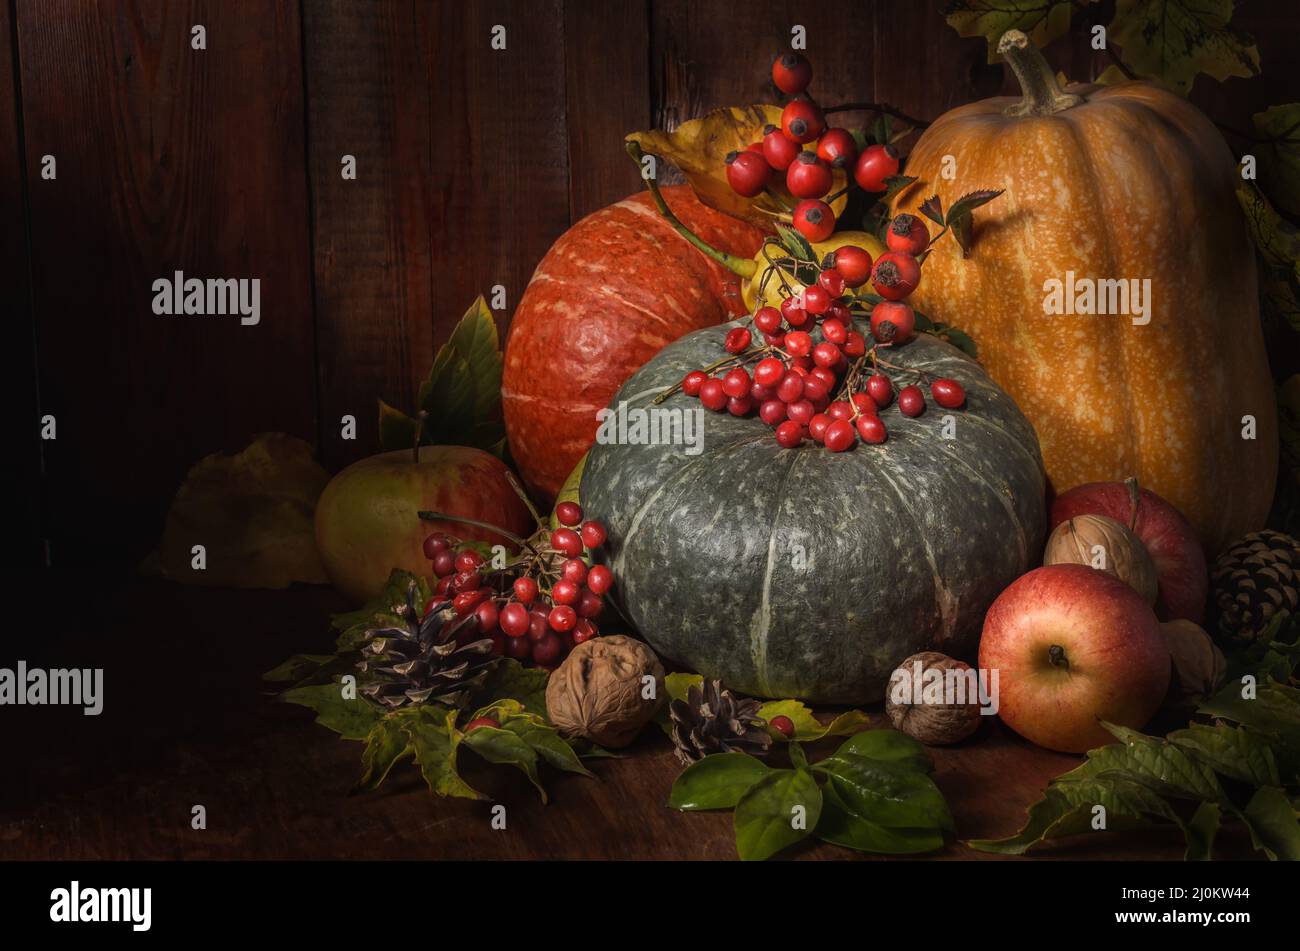 Pumpkin and other fruits on a dark wooden background in a rustic style Stock Photo